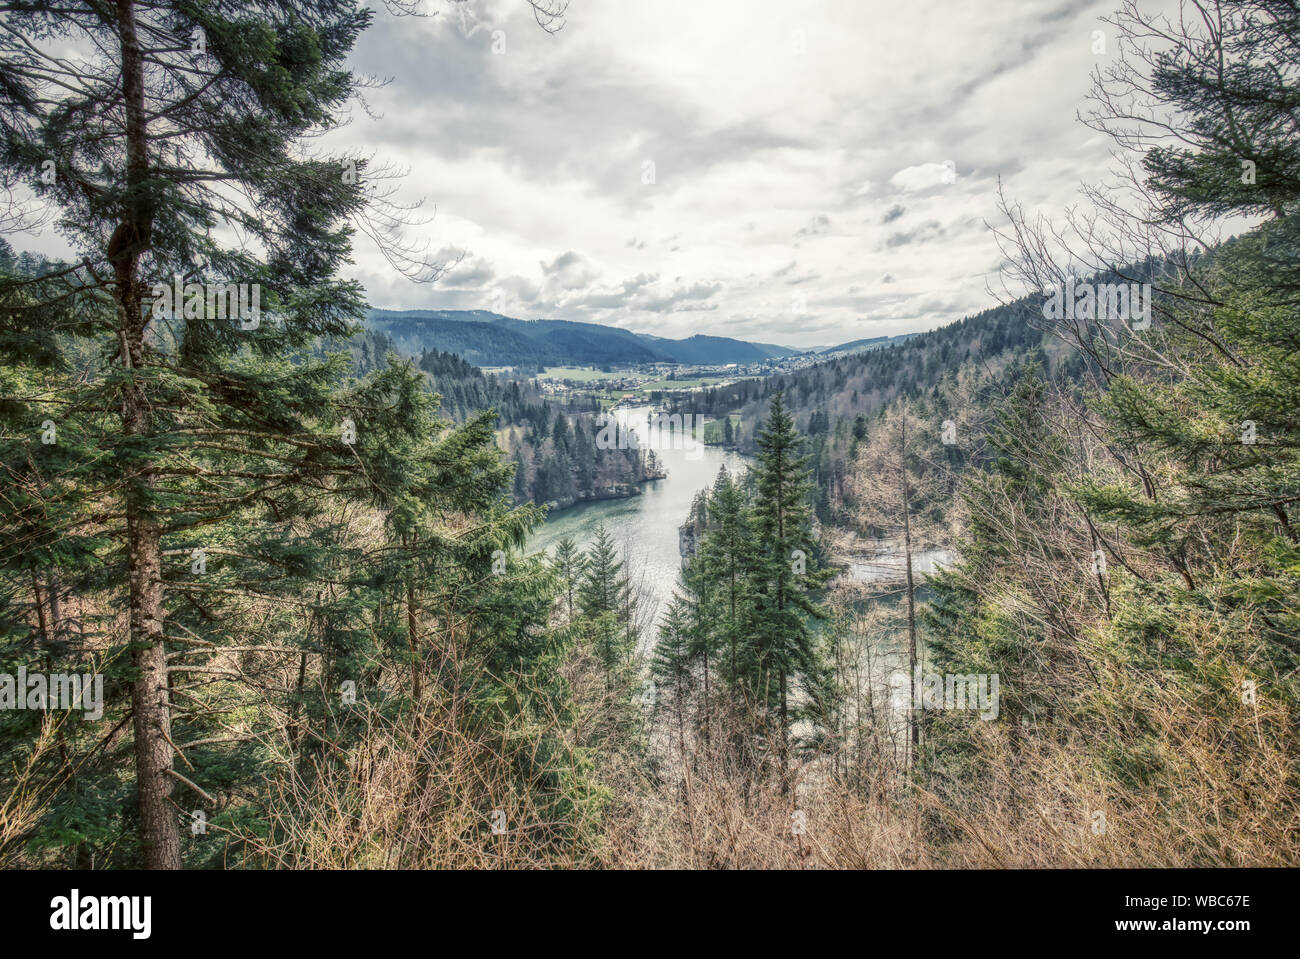 Amazing river doubs on the border of france and switzerland, panorama Stock Photo